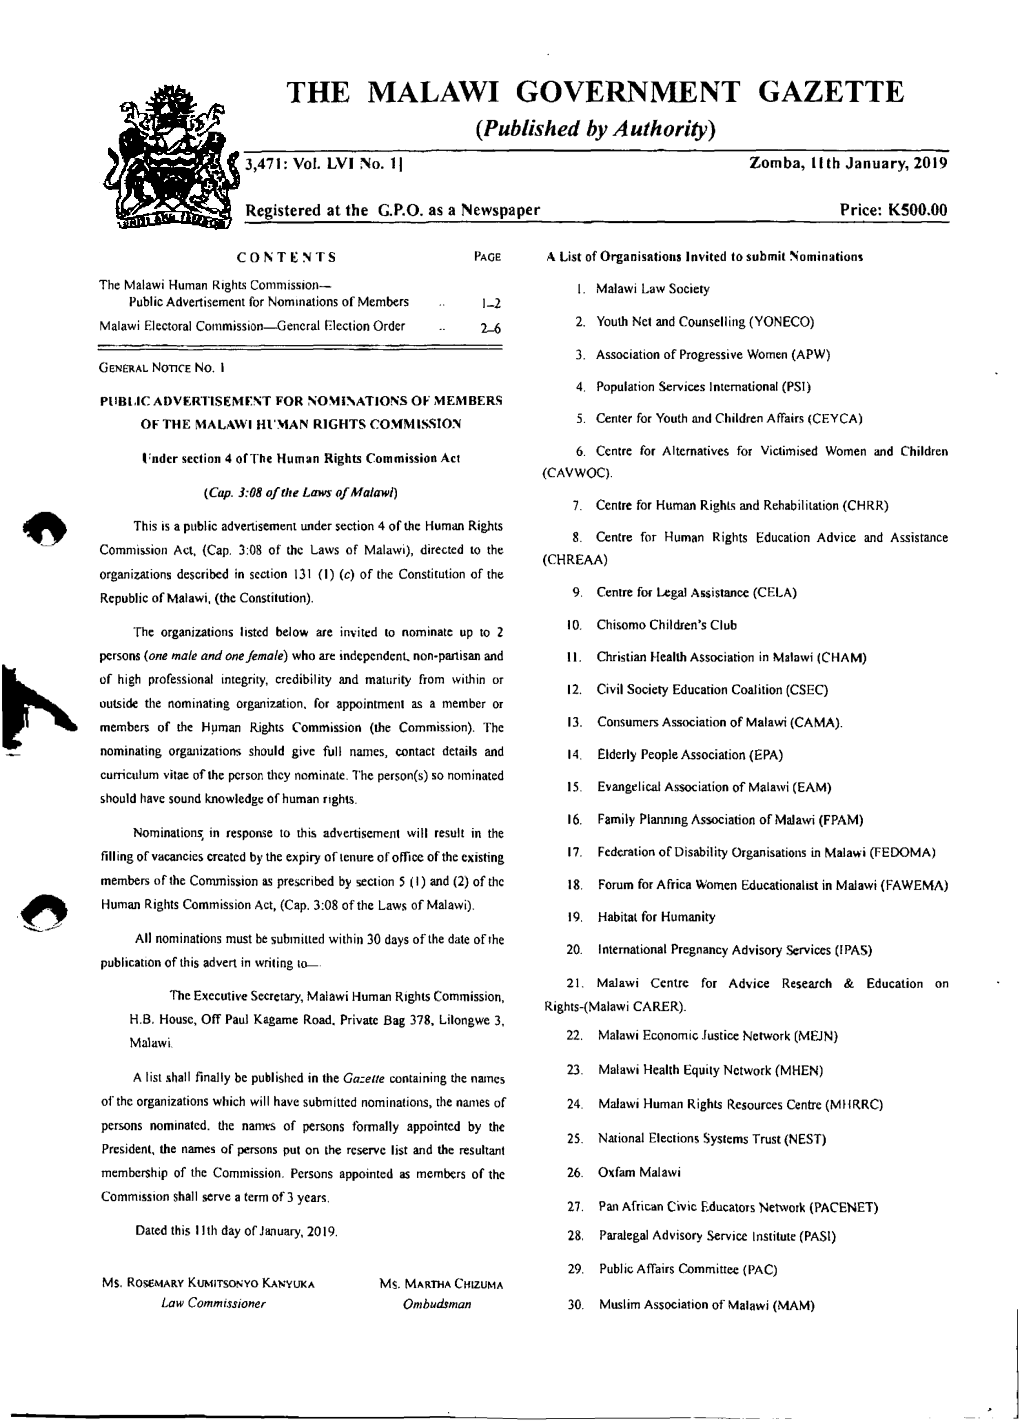 THE MALAWI GOVERNMENT GAZETTE {Published by Authority) 3,471: Vol